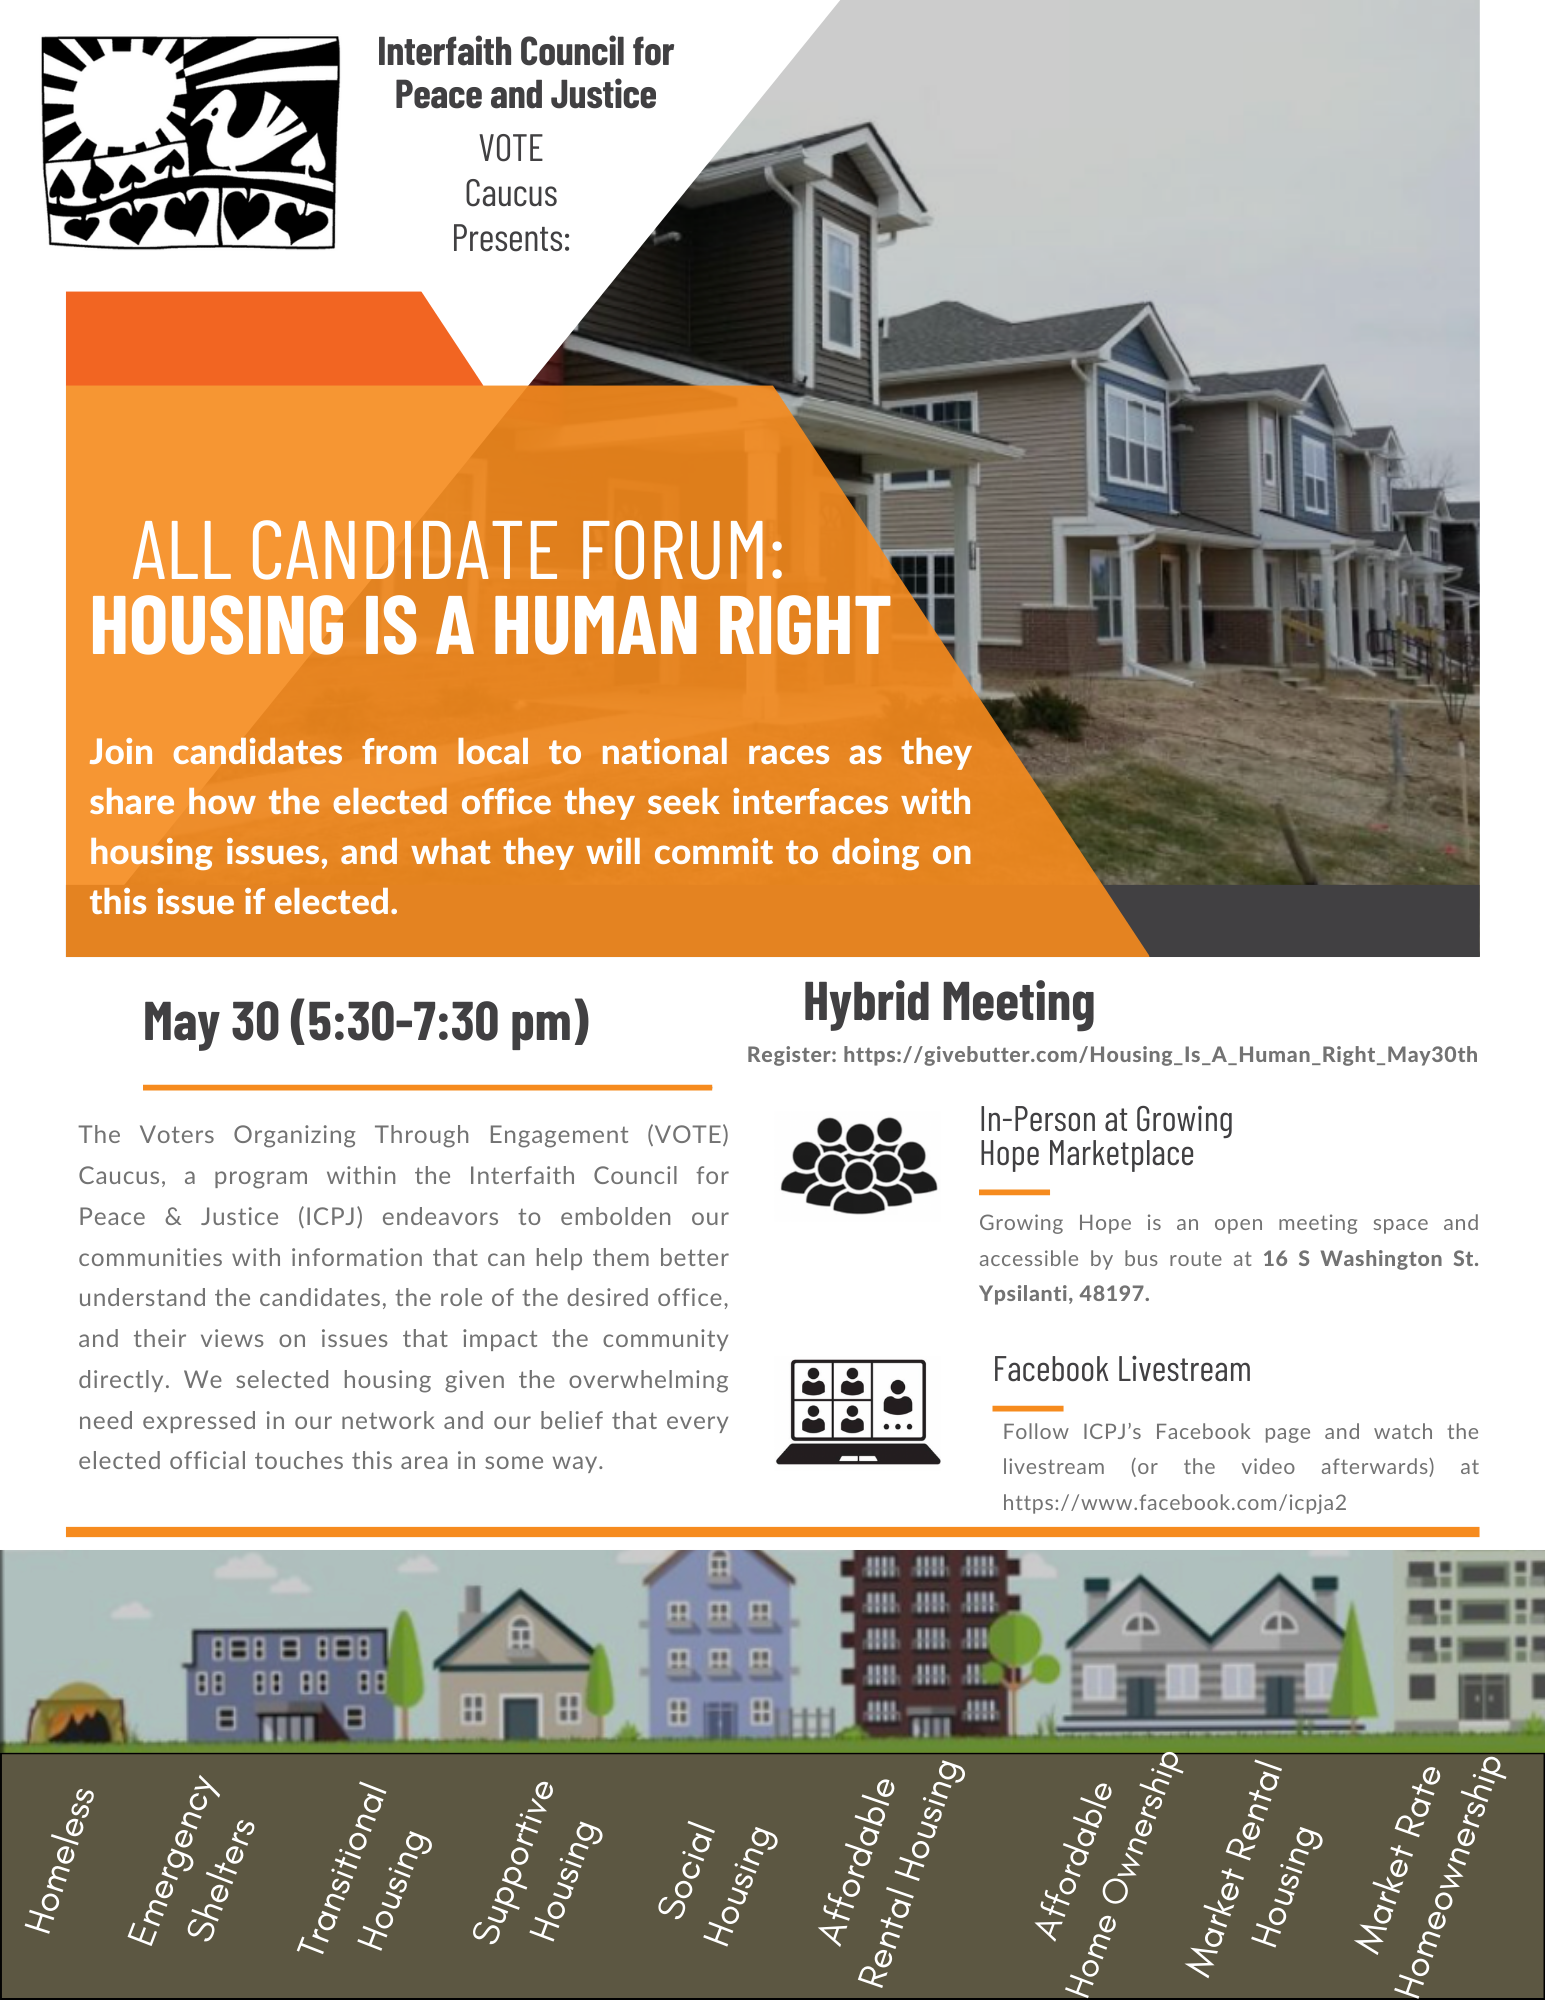 Candidate Forum: Housing is a Human Right